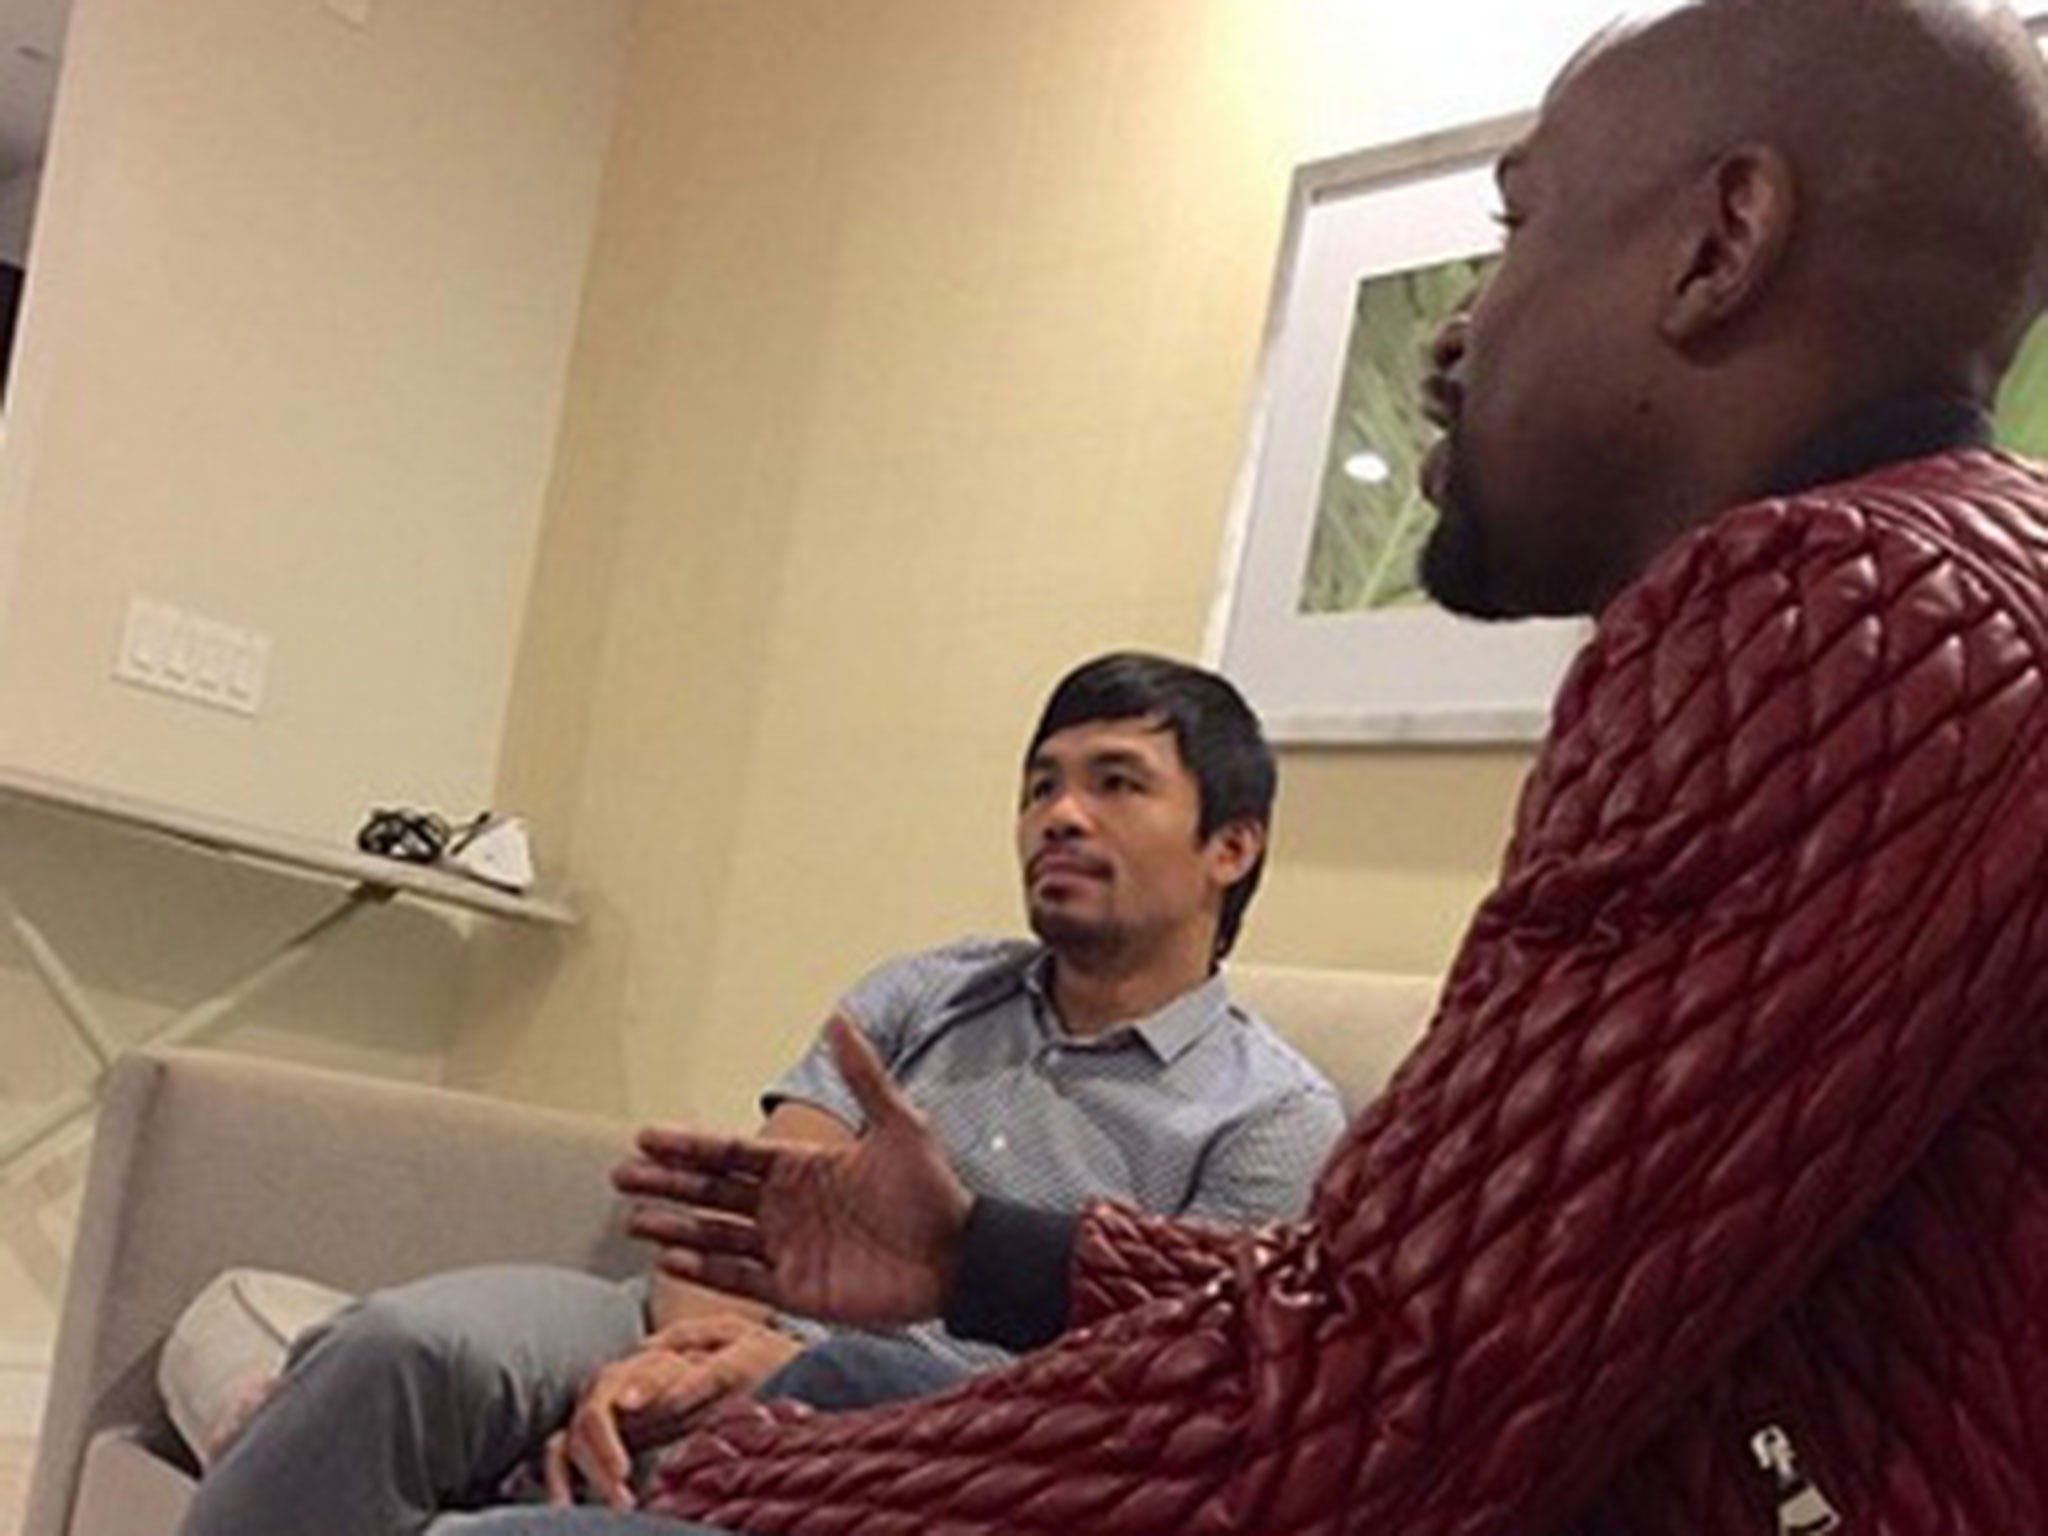 Floyd Mayweather and Manny Pacquiao have confirmed that the much-anticipated bout will finally take place